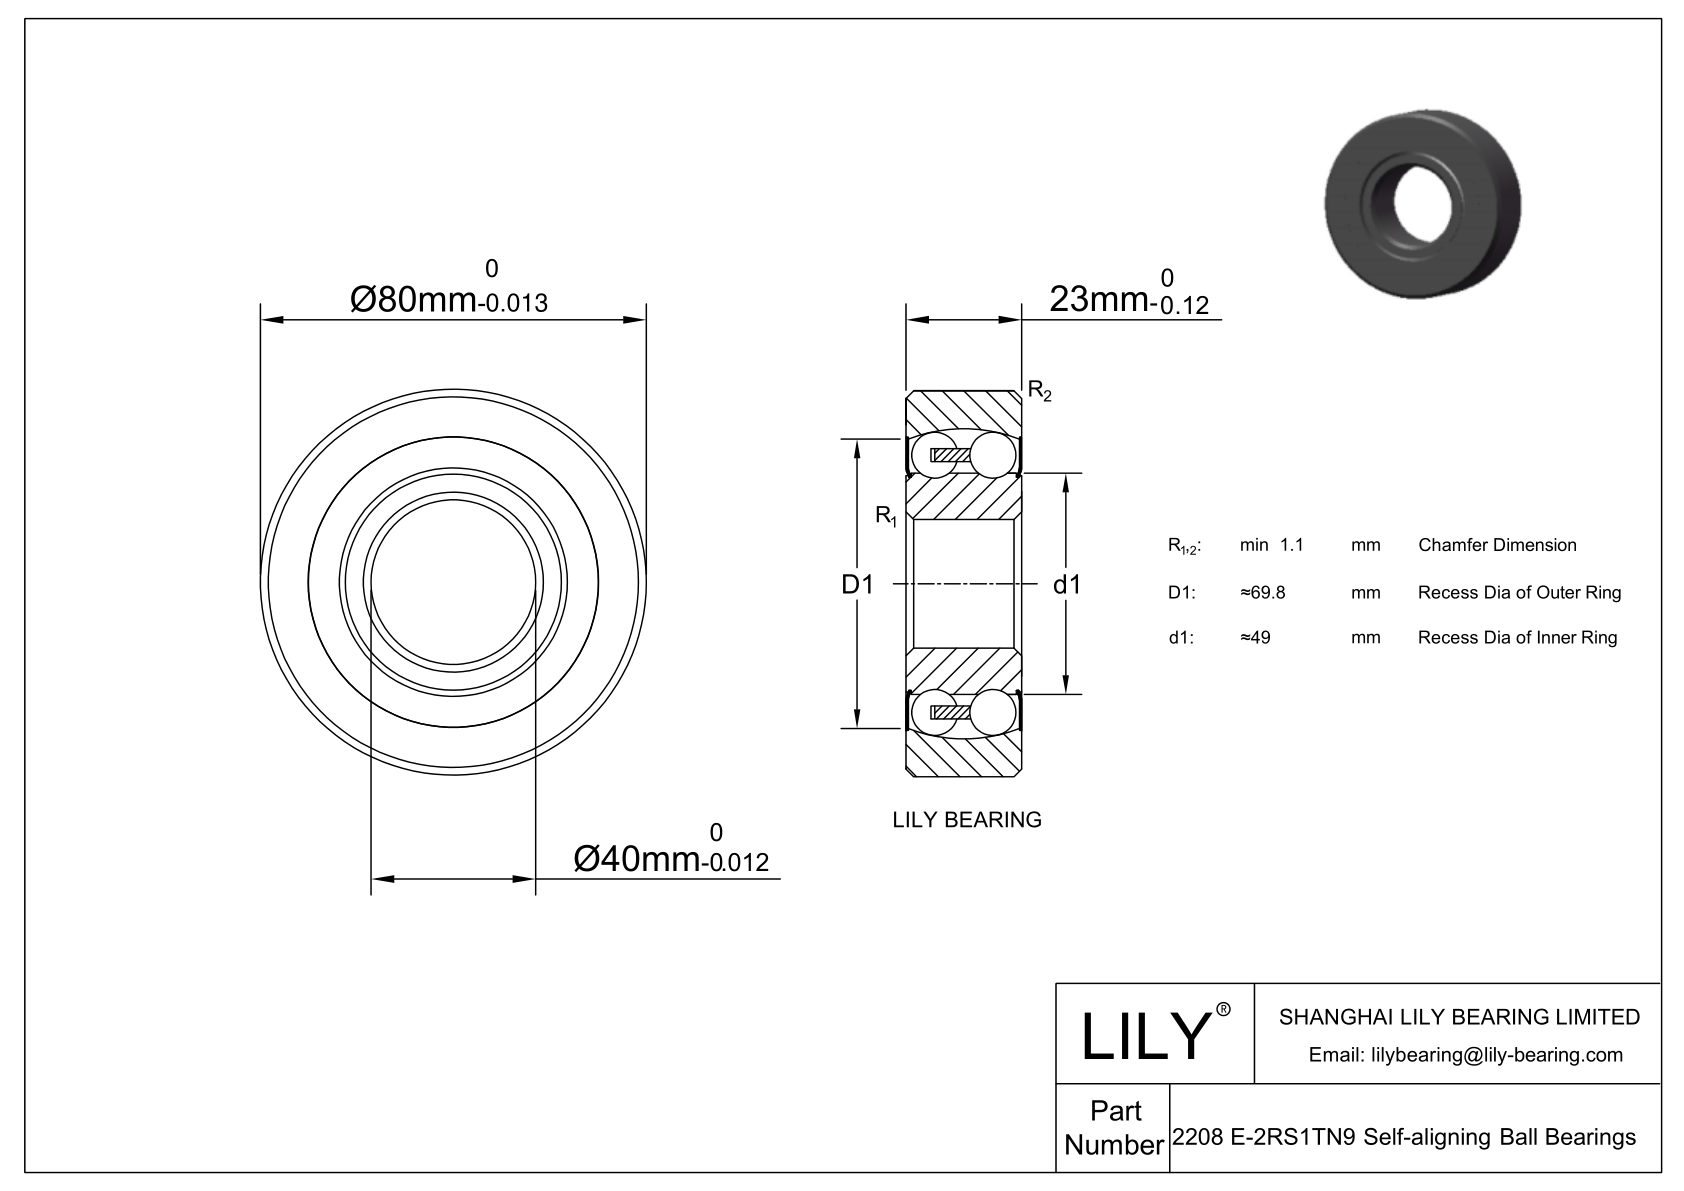 S2208 E-2RS1TN9 Stainless Steel Self Aligning Ball Bearings cad drawing